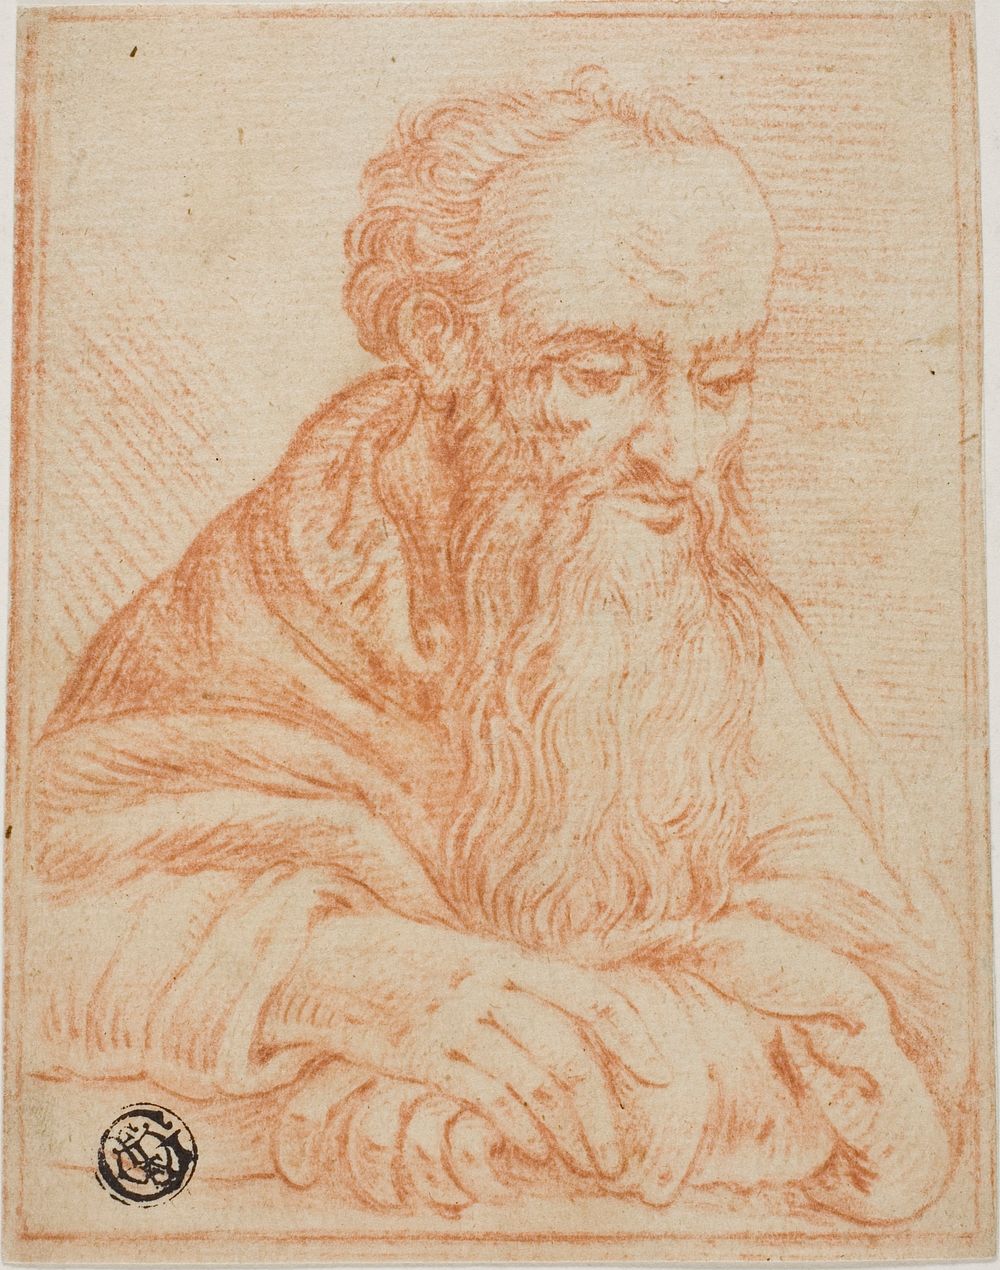 Half-Length Sketch of Bearded Man Leaning on Sill or Table by Unknown Italian